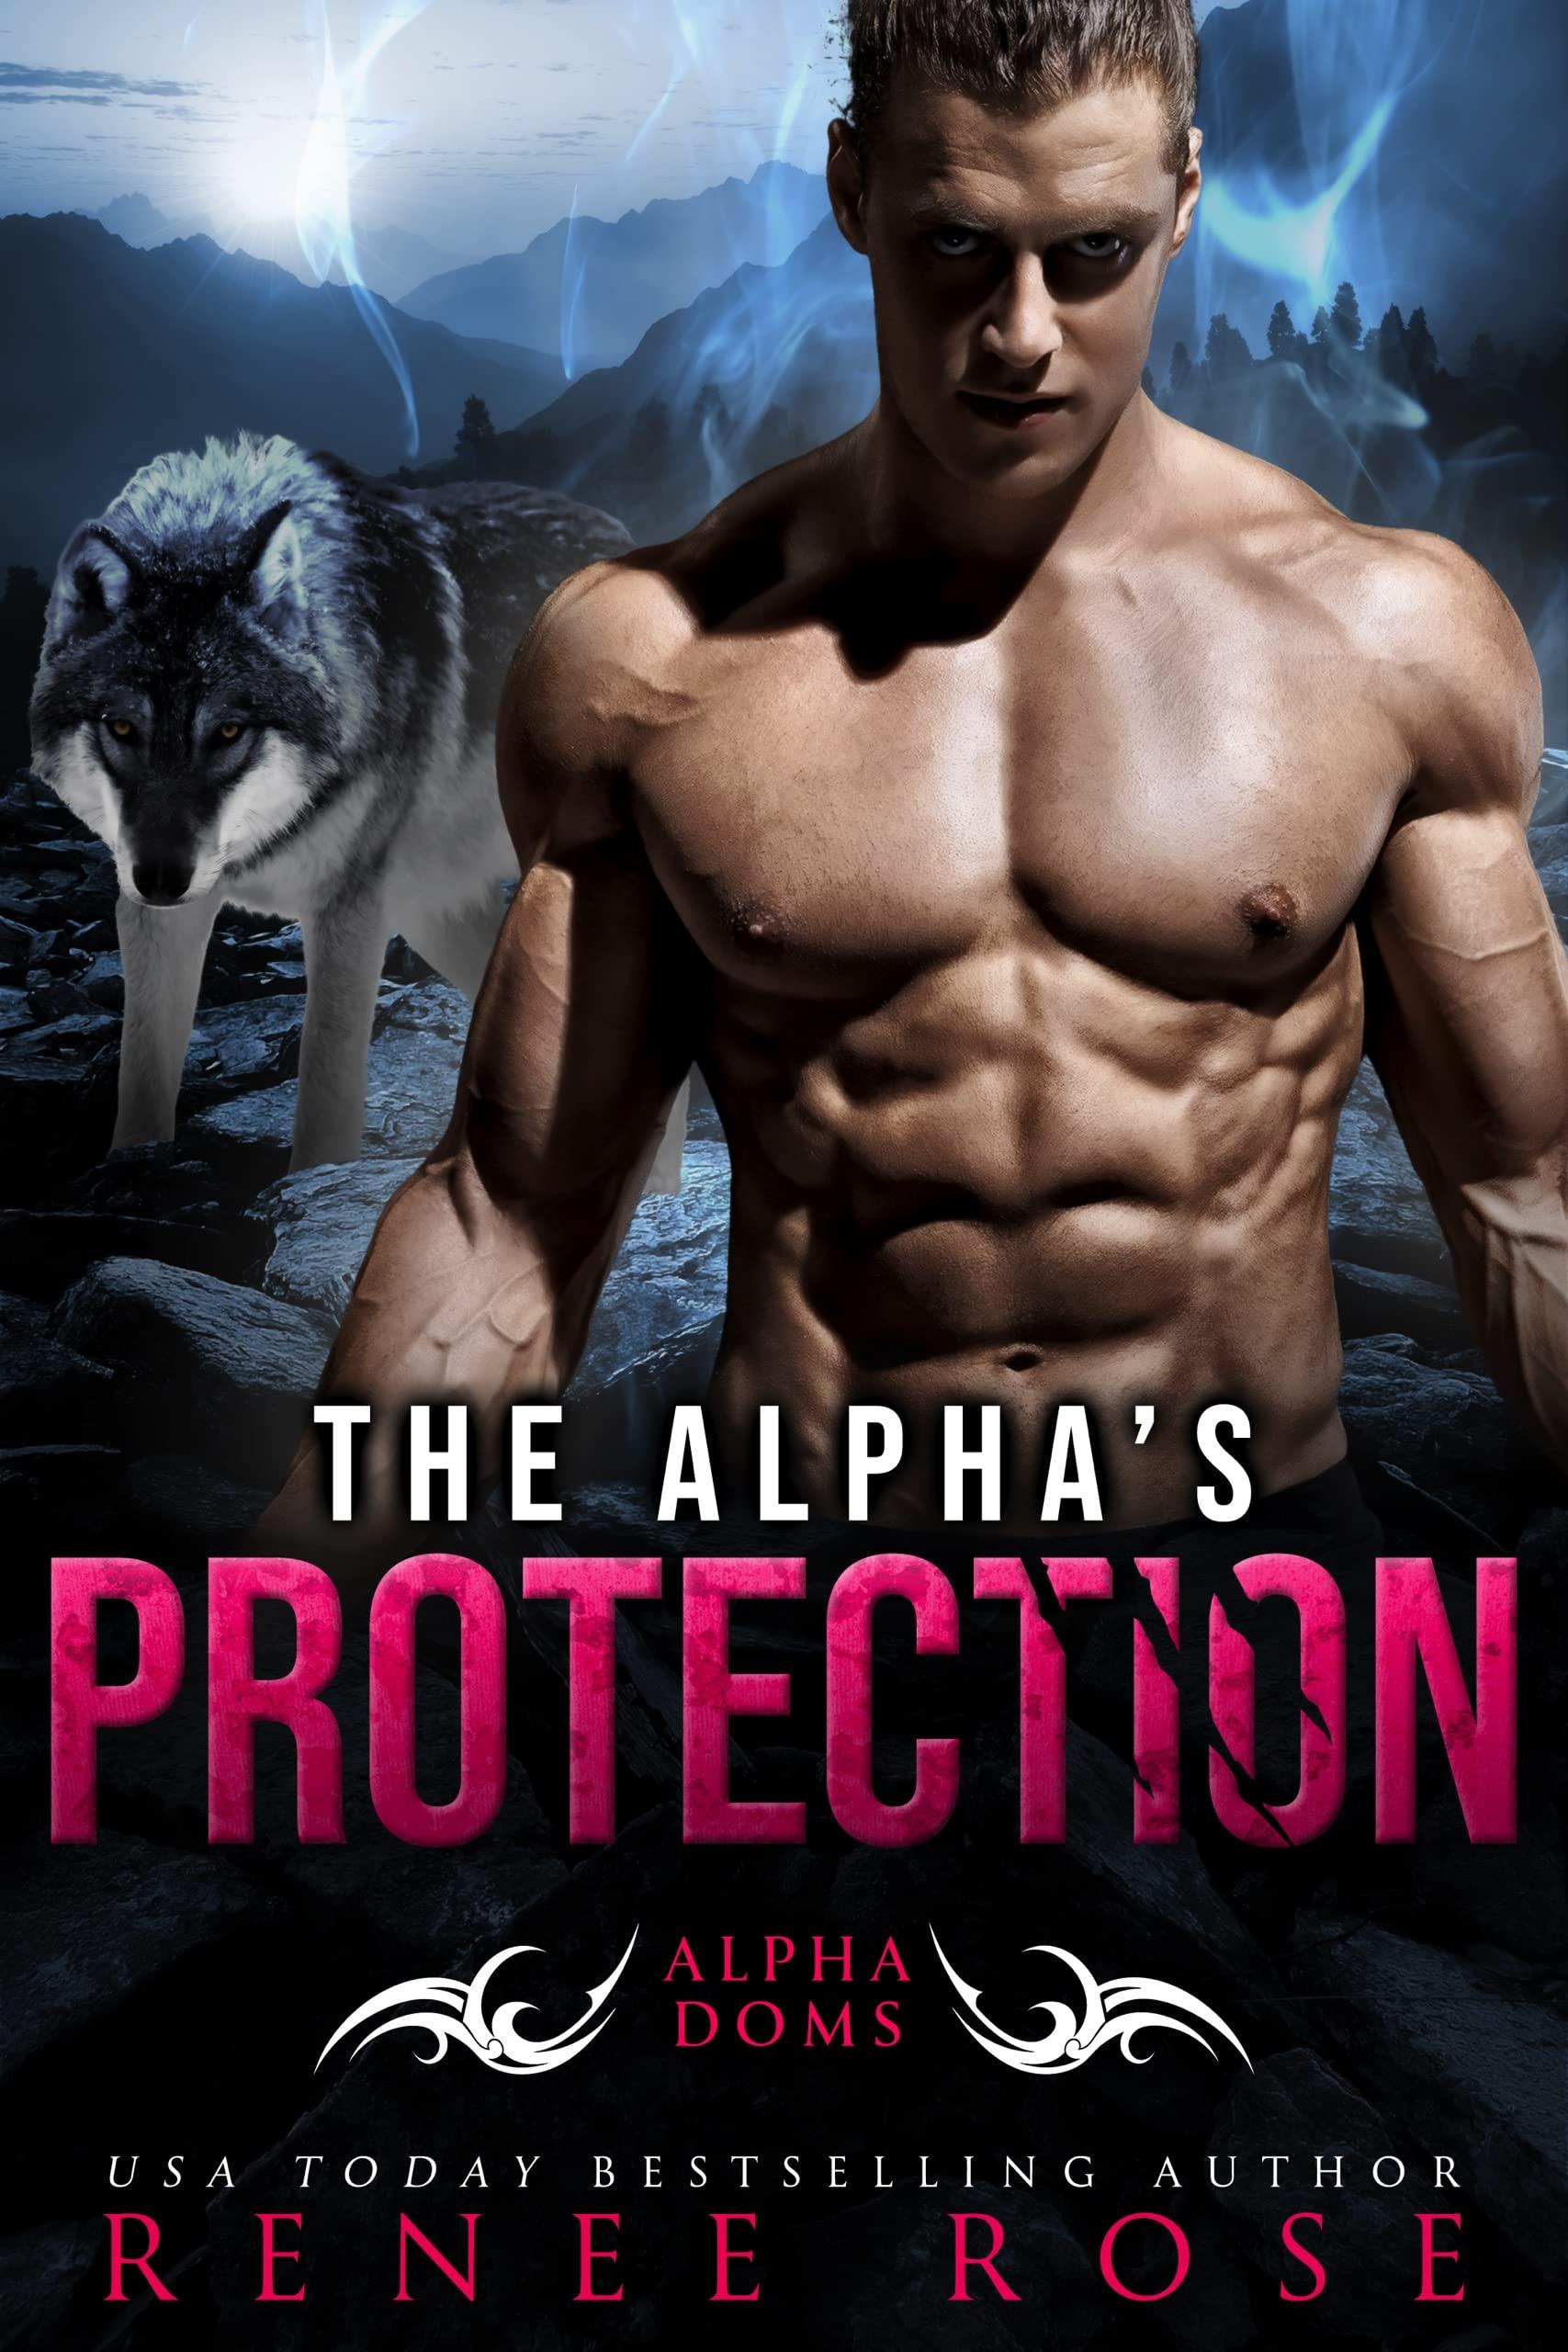 The Alpha's Protection